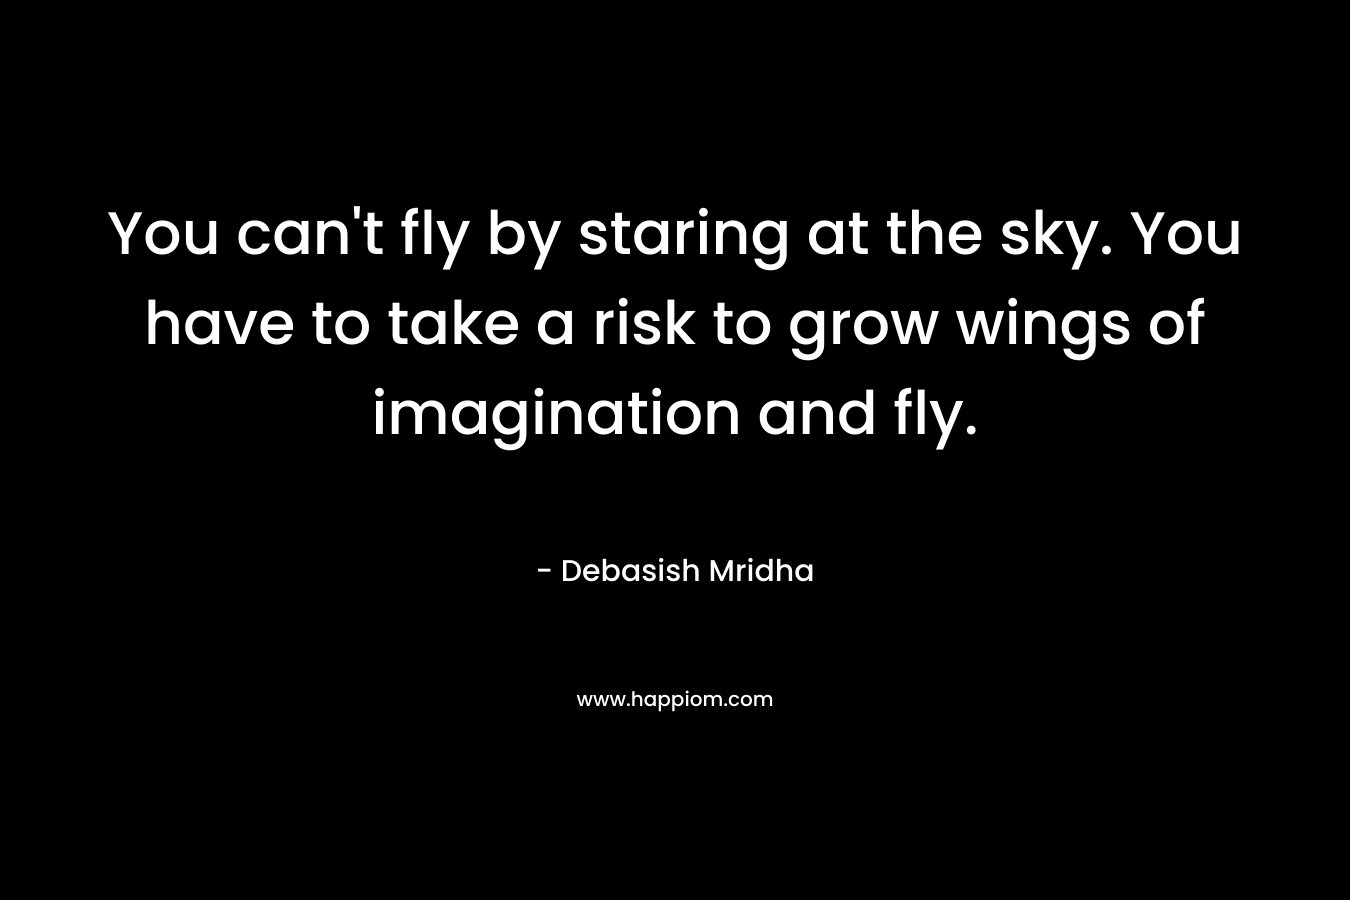 You can't fly by staring at the sky. You have to take a risk to grow wings of imagination and fly.